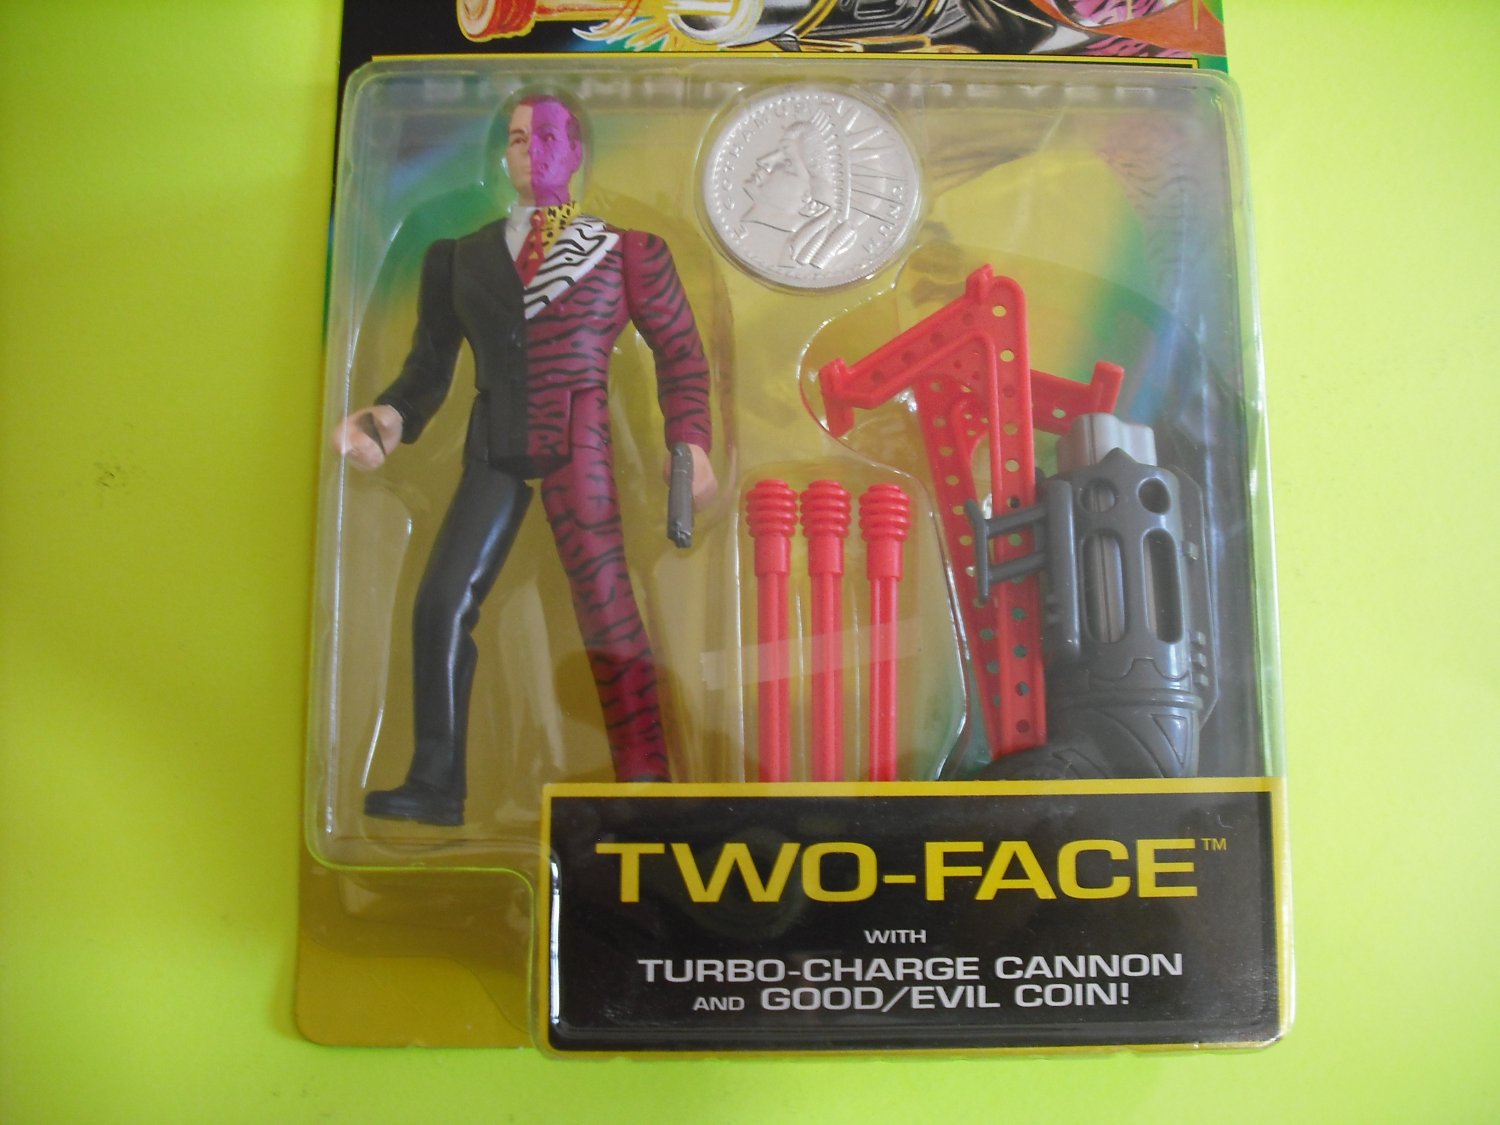 download batman forever two face toy